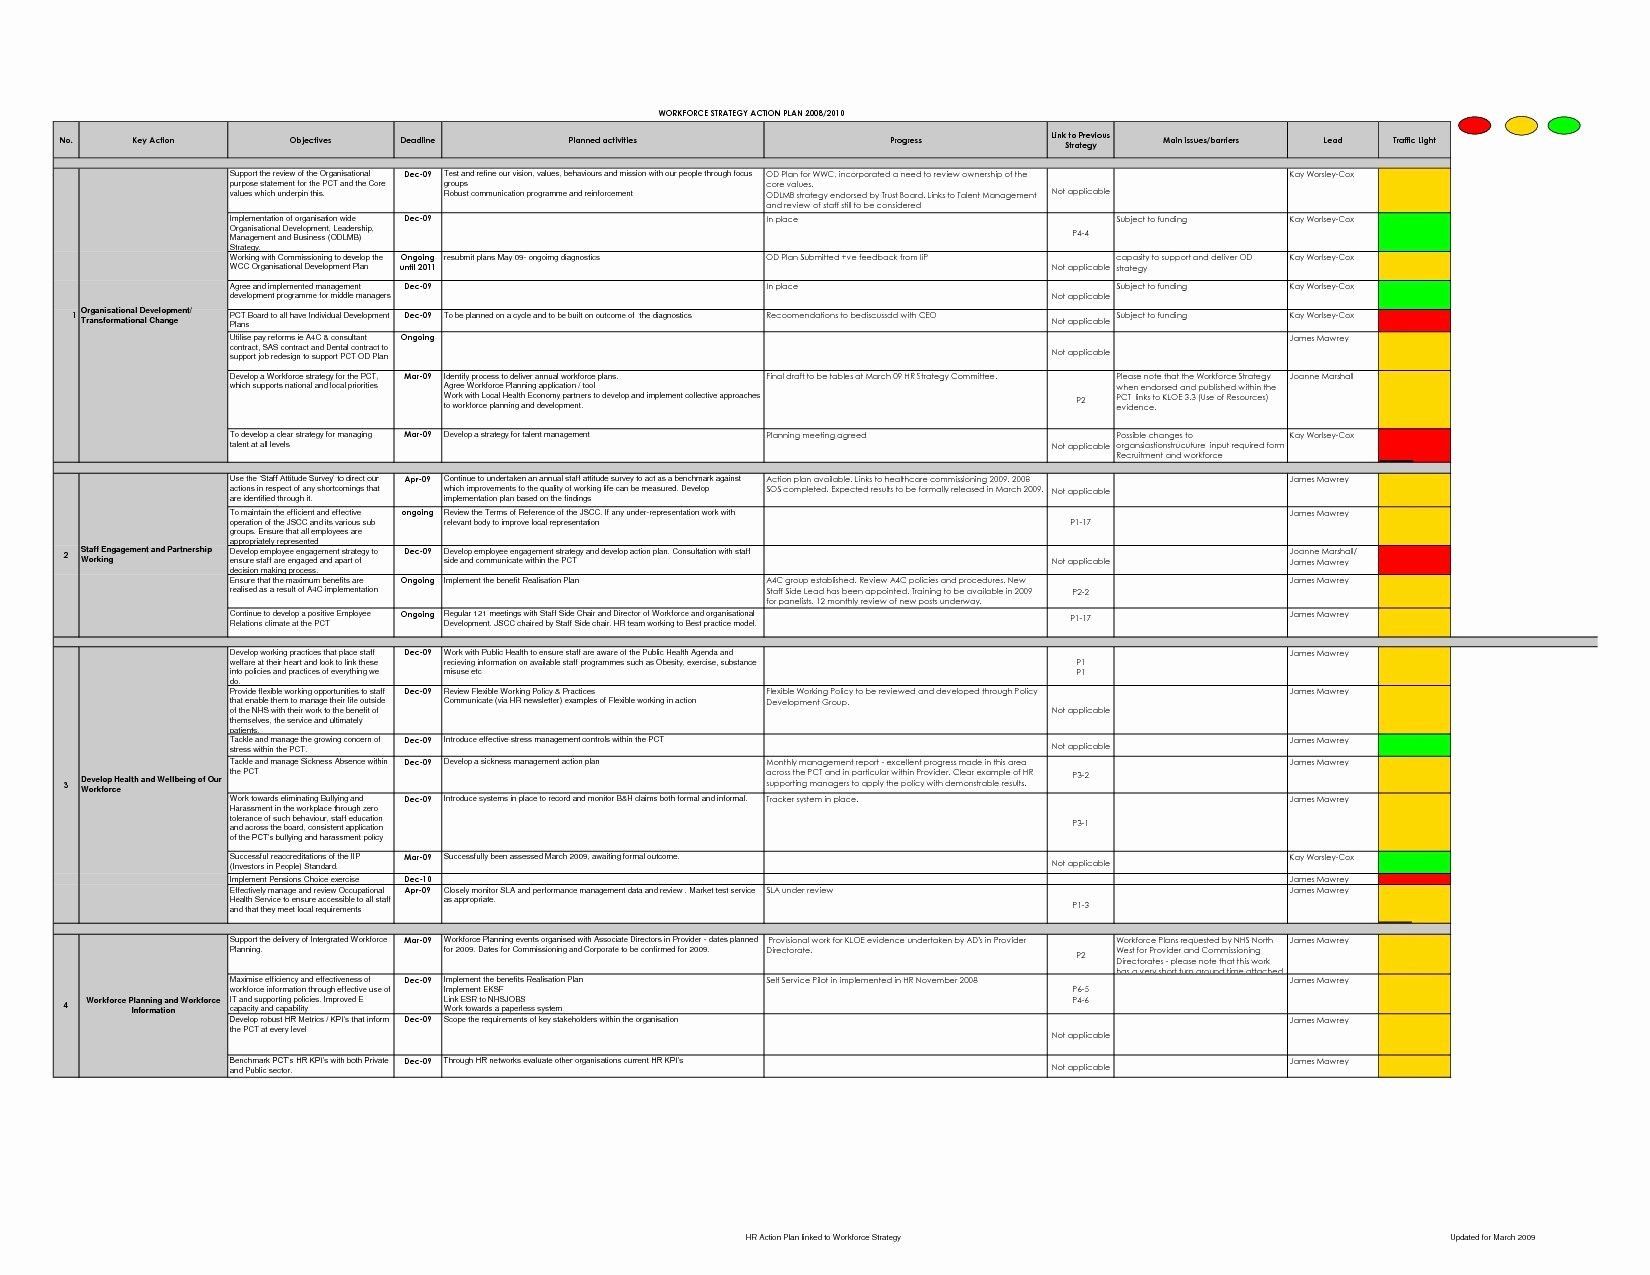 Document Of Gdpr Data Inventory Excel Template In Gdpr Data Inventory Excel Template For Free